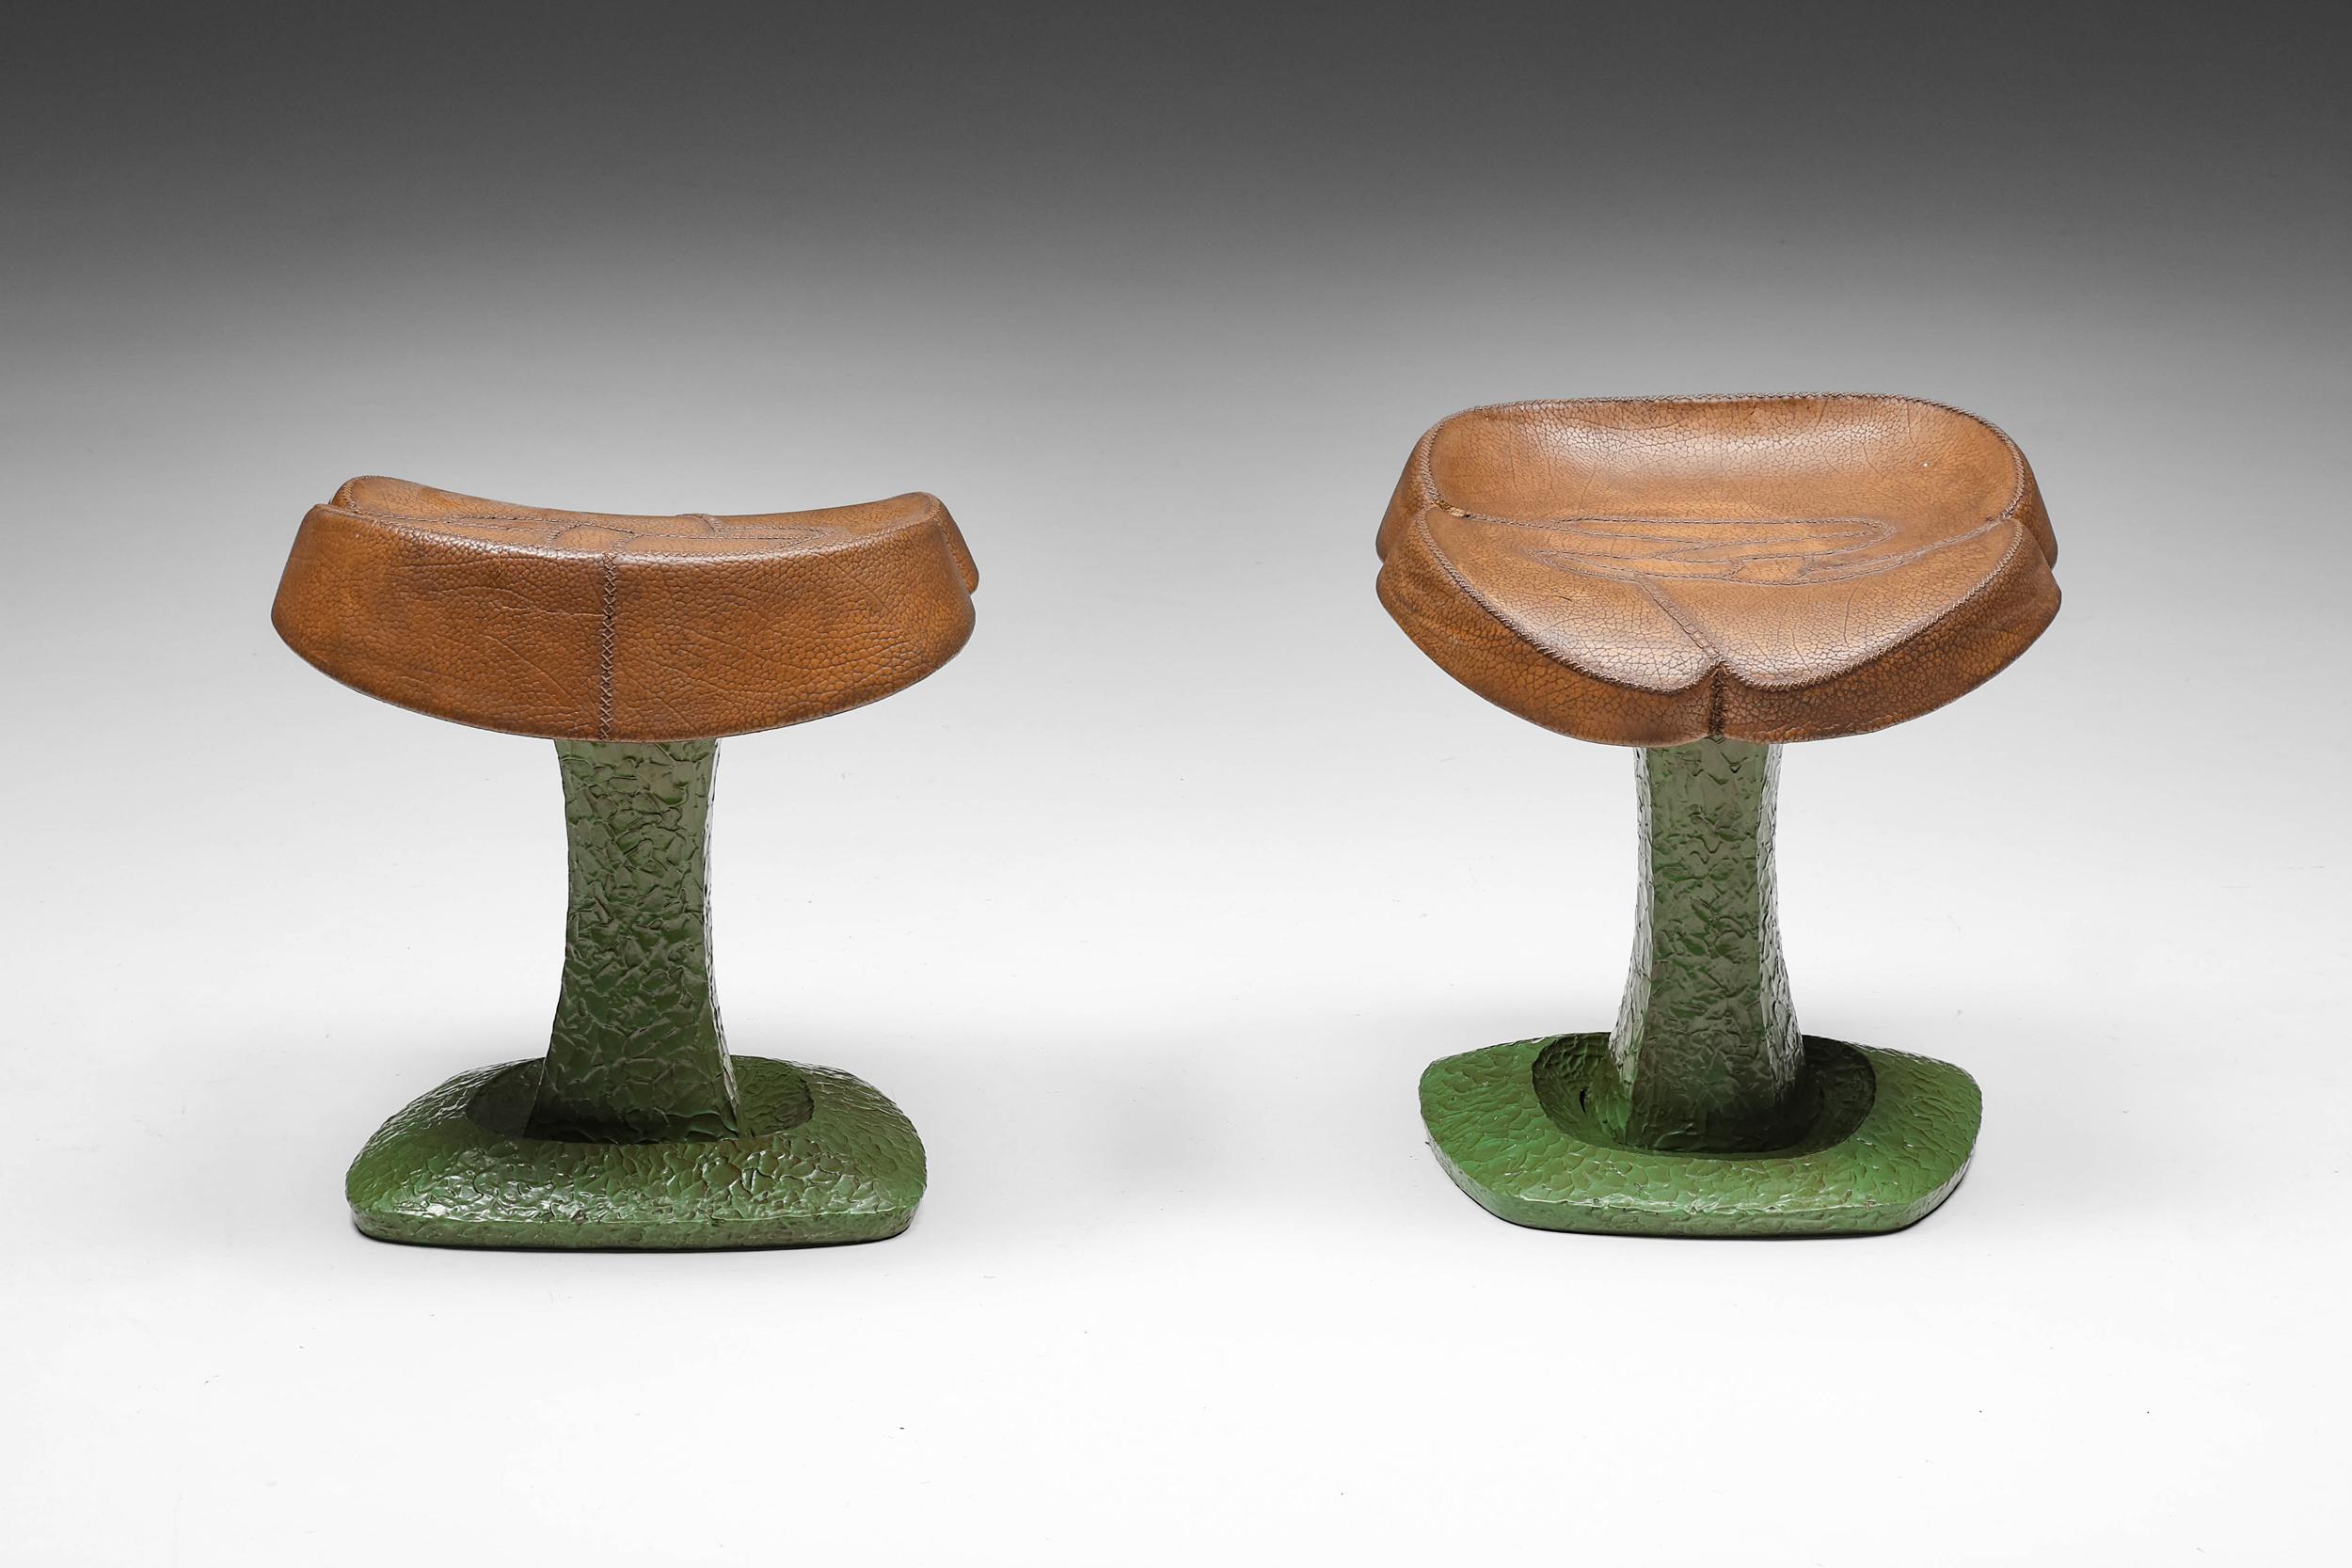 Post-modern; Italy; Mid-century modern; Wabi-Sabi; Oriental; Memphis; Organic modern; 

Postmodern set of stools with curved seating made as a special commission by an Italian artist in the 1950s. With oriental influences, this eclectic piece